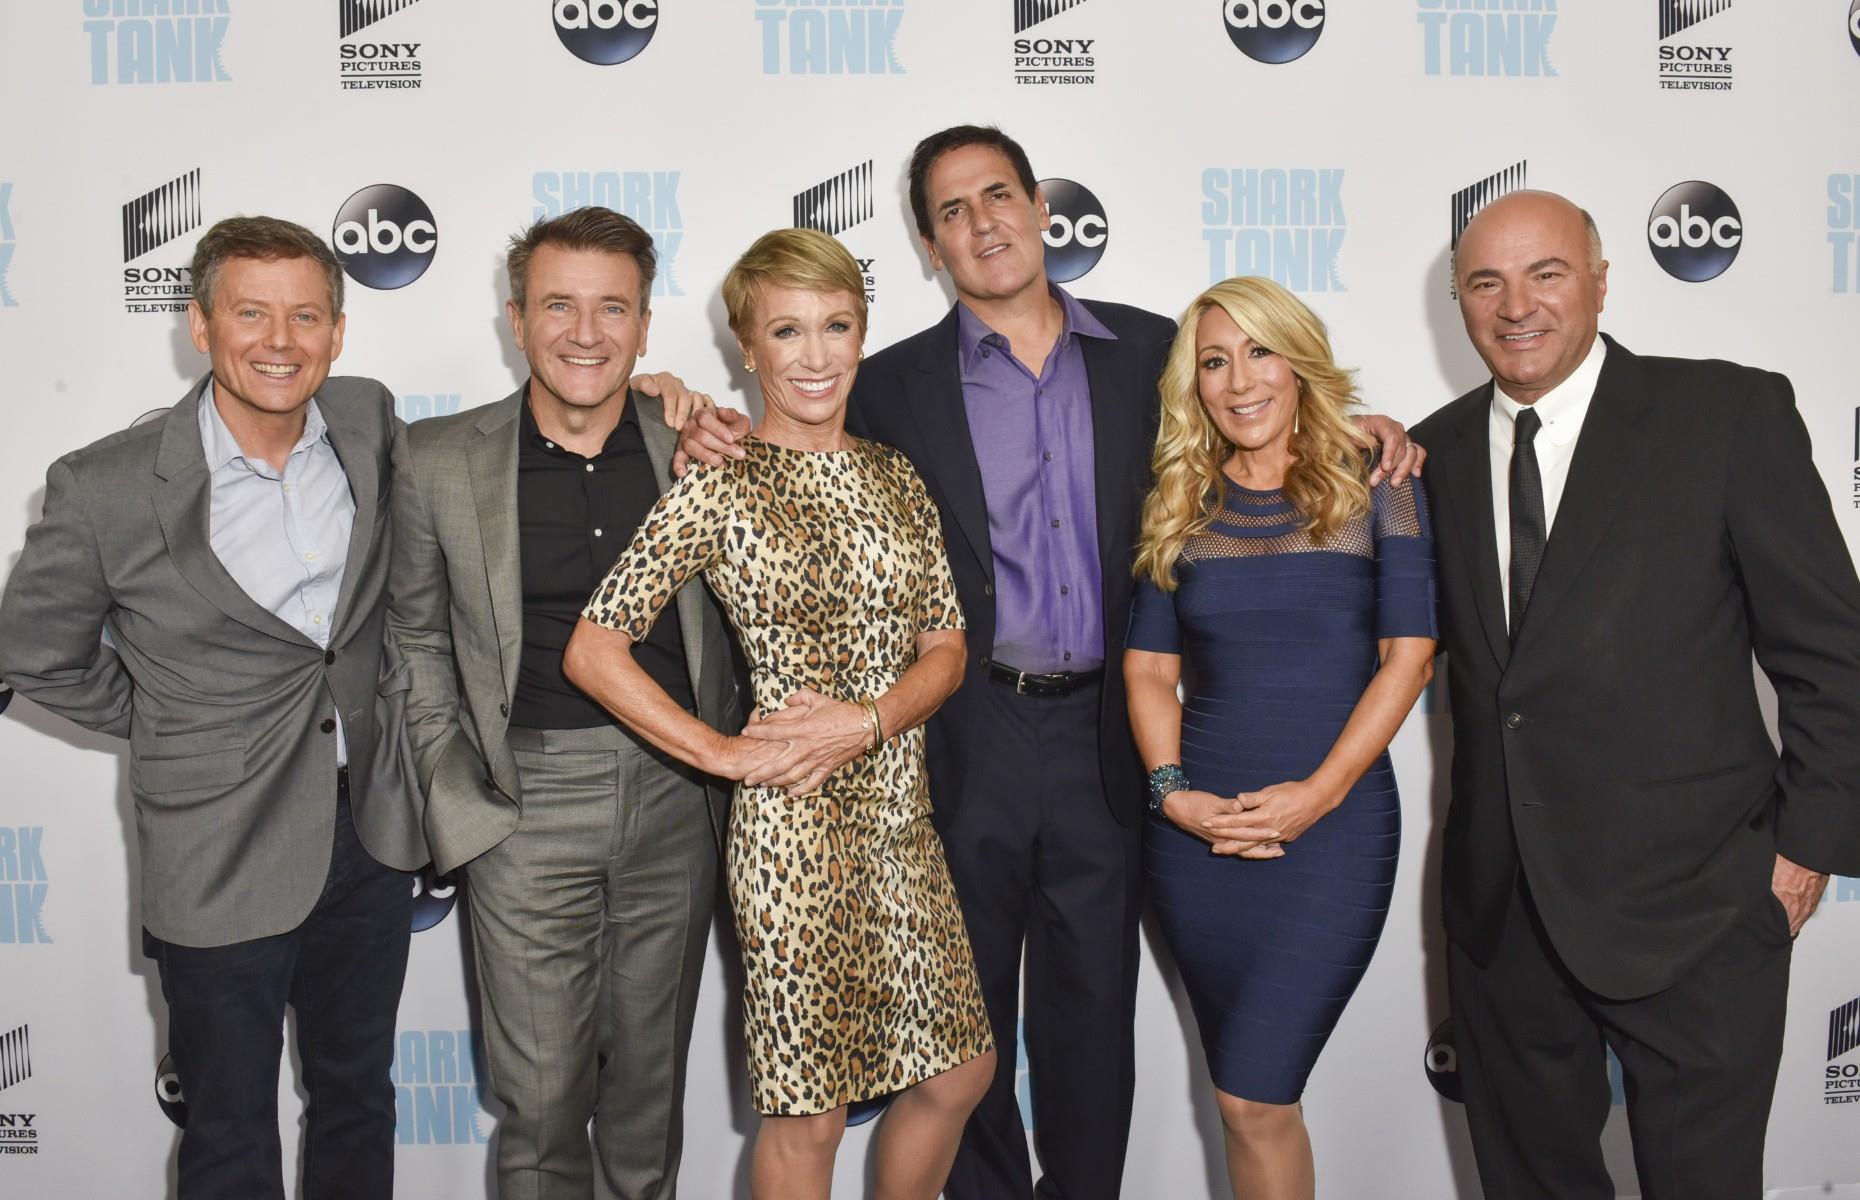 Shark Tank's' richest sharks & most successful products after 15